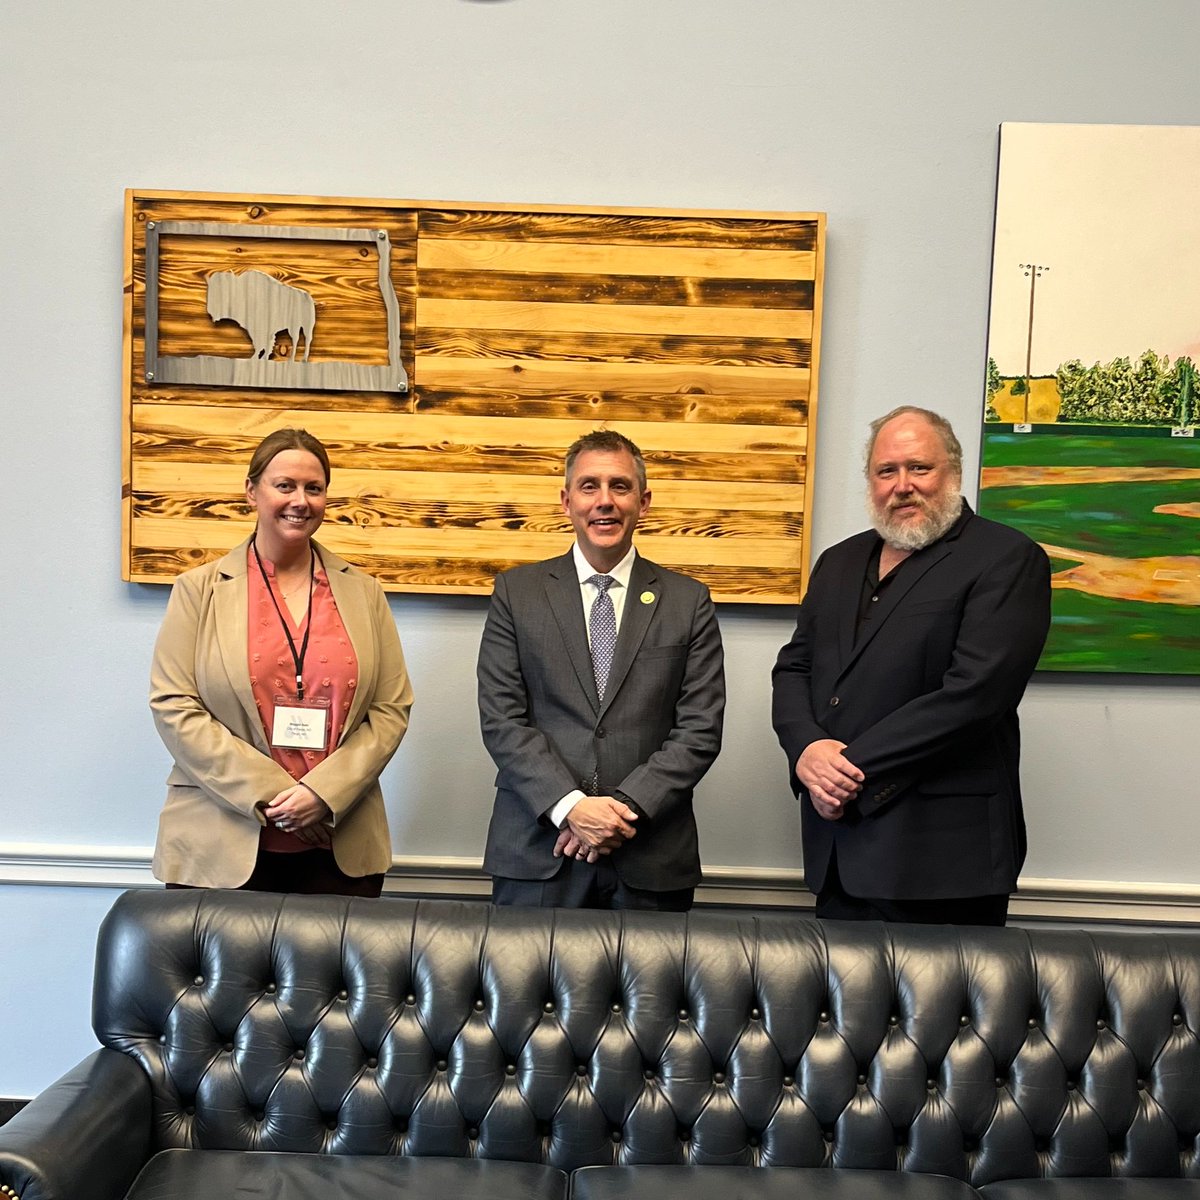 Local water utilities serve a key role in treating wastewater and drinking water. This week, I met with representatives of the American Waterworks Association from North Dakota.